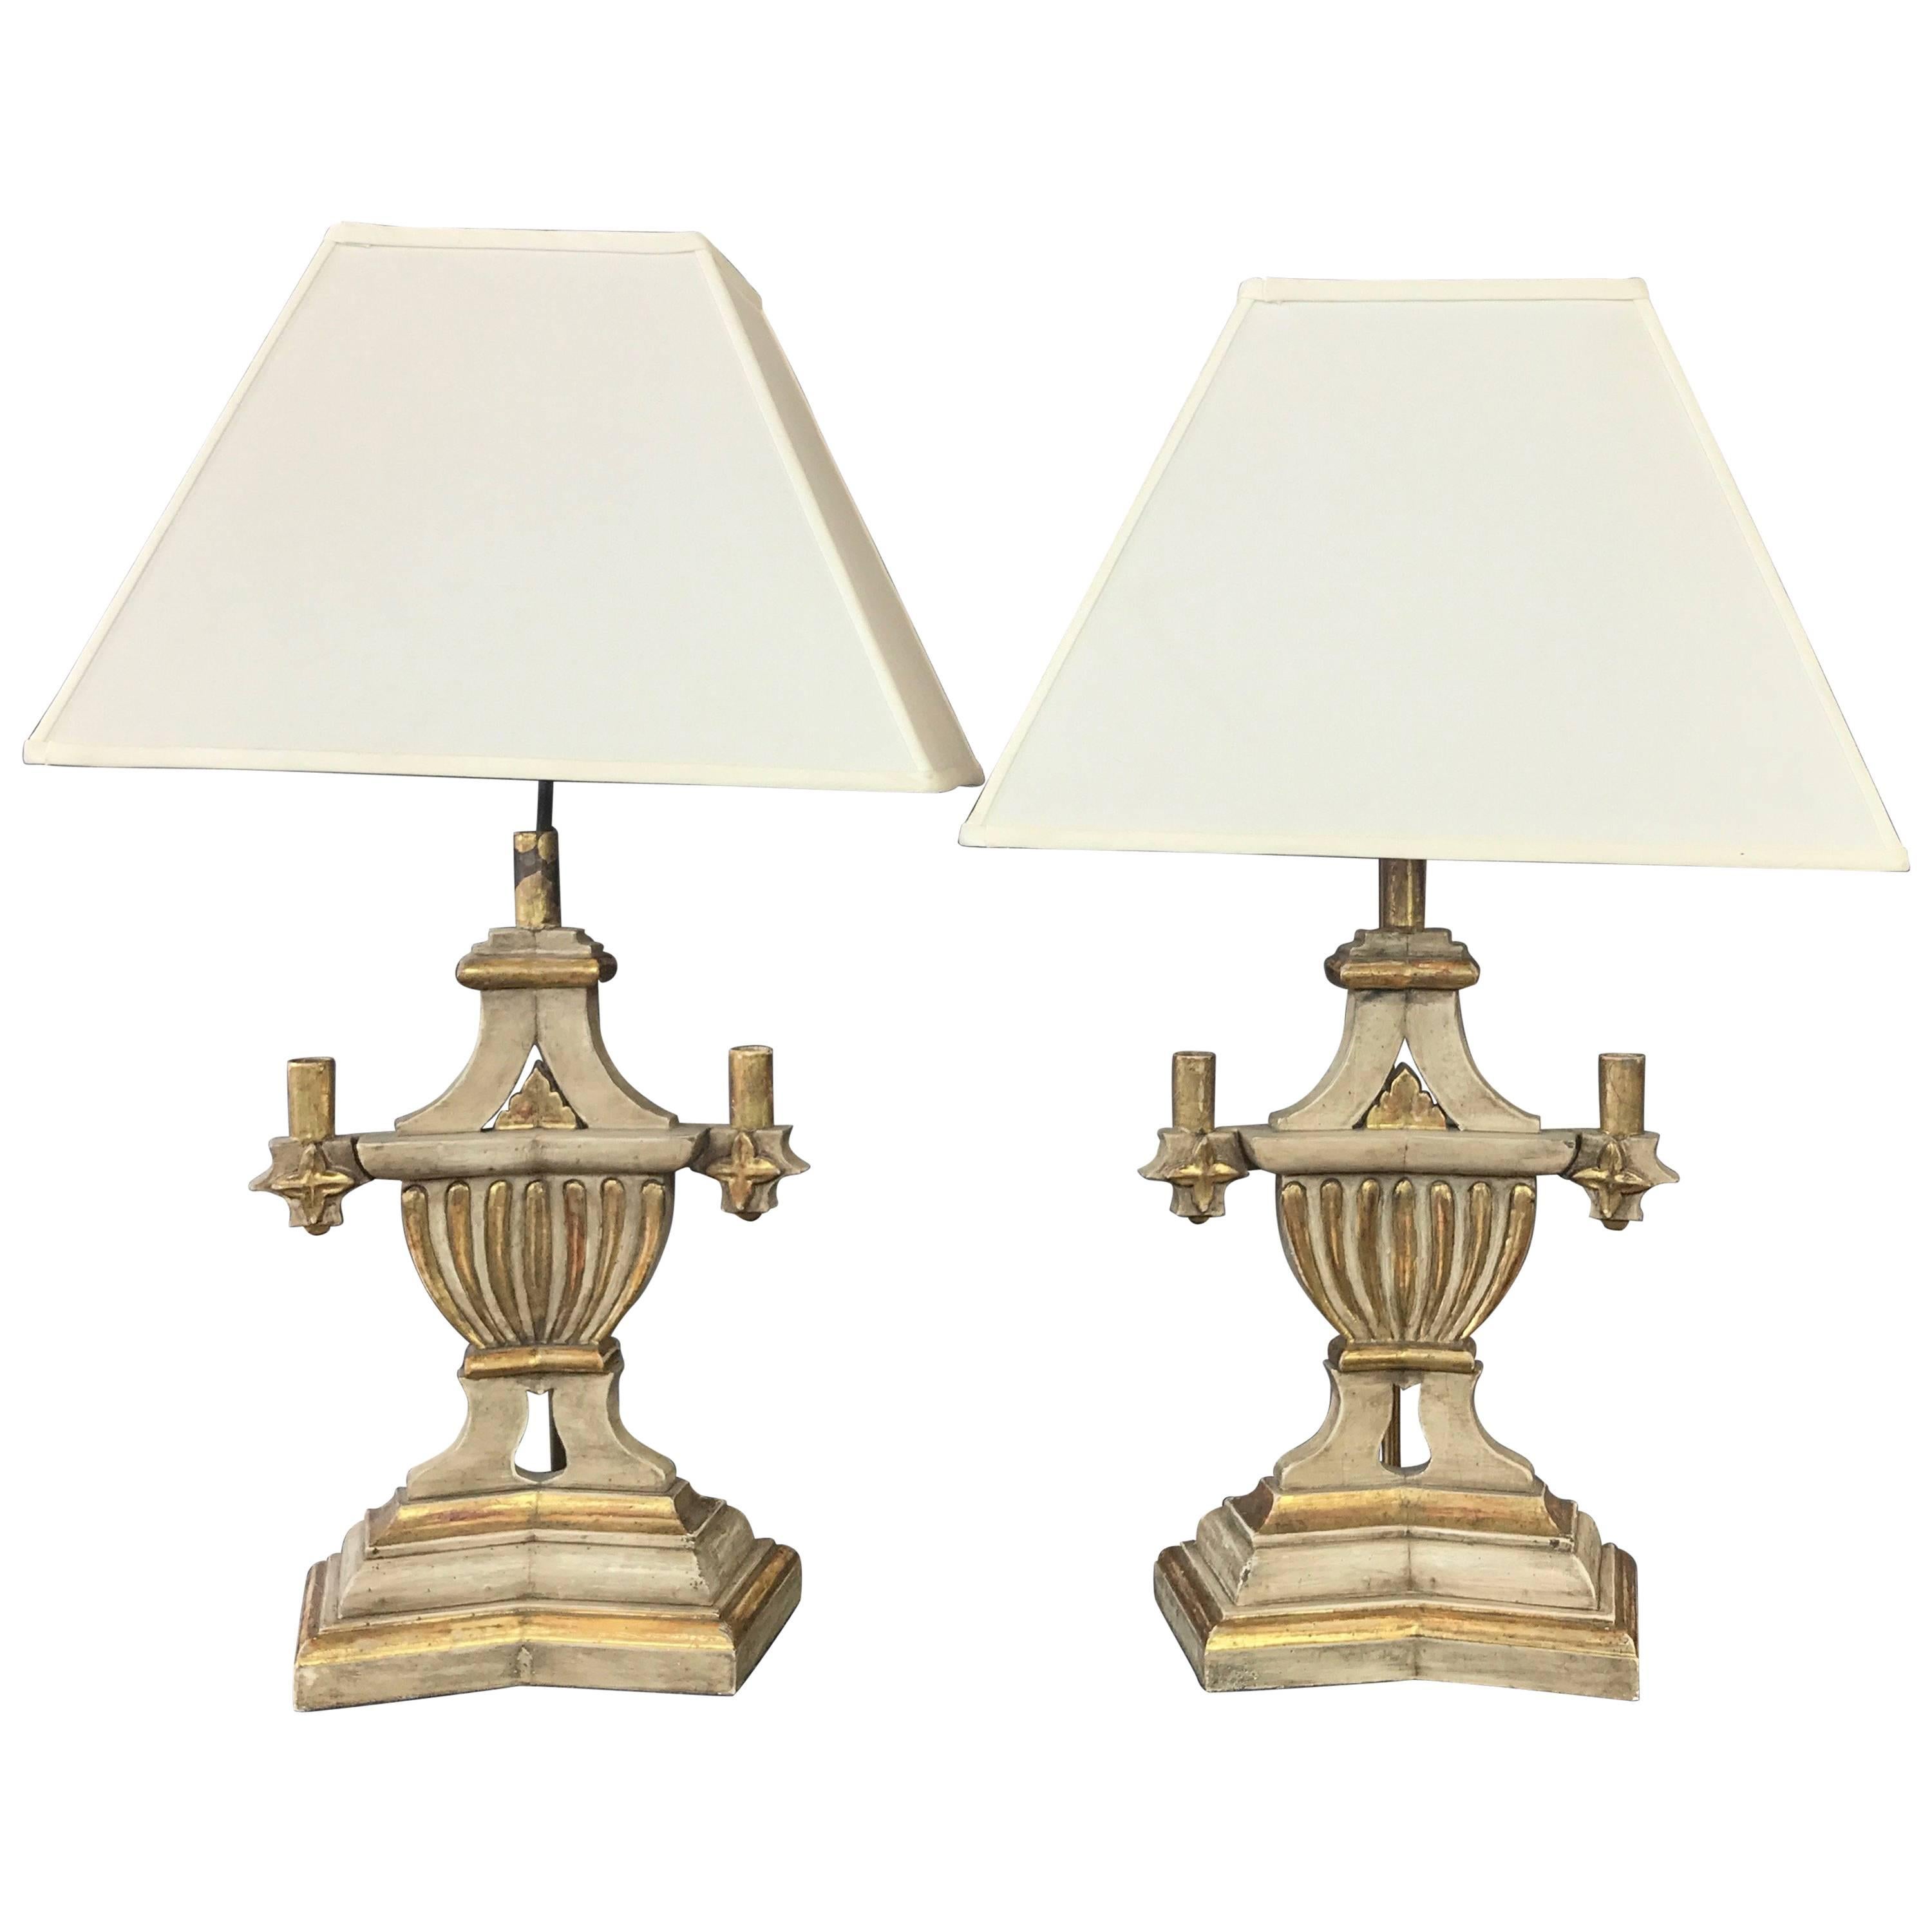 Pair of 1930s Italian Neoclassical Parcel-Gilt Candleholder Table Lamps For Sale